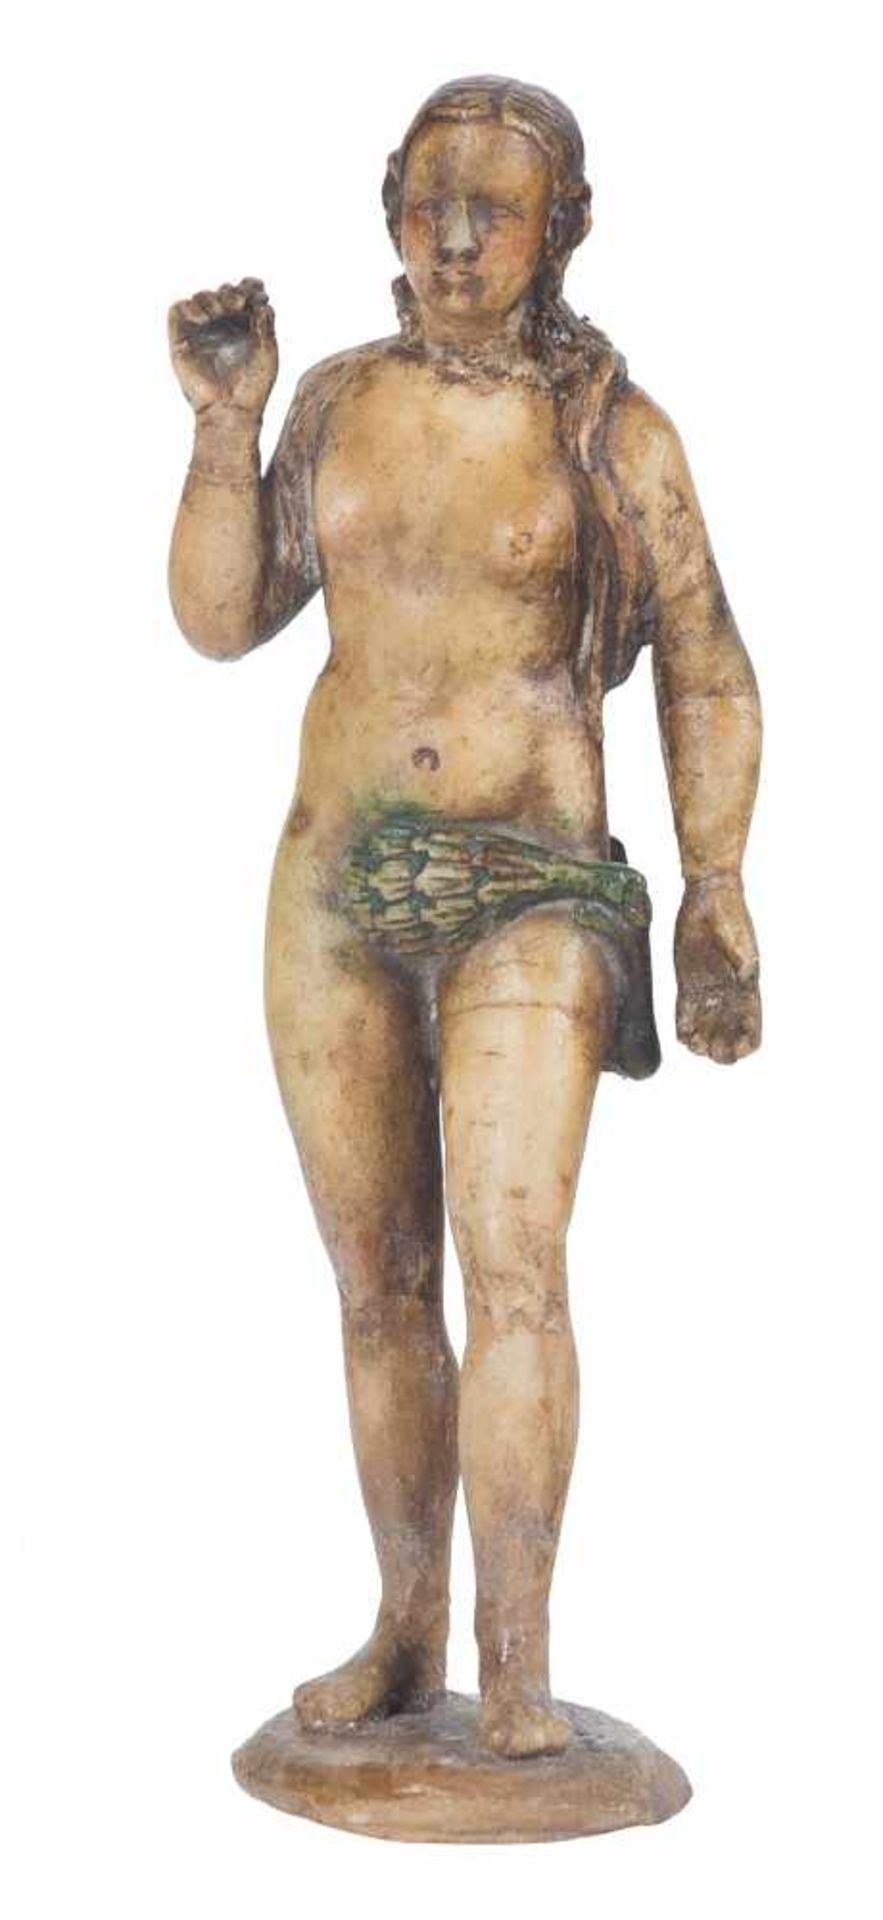 Eve Sculpted alabaster figure with polychrome residue. Italy. 16th century. Height: 19 cm.